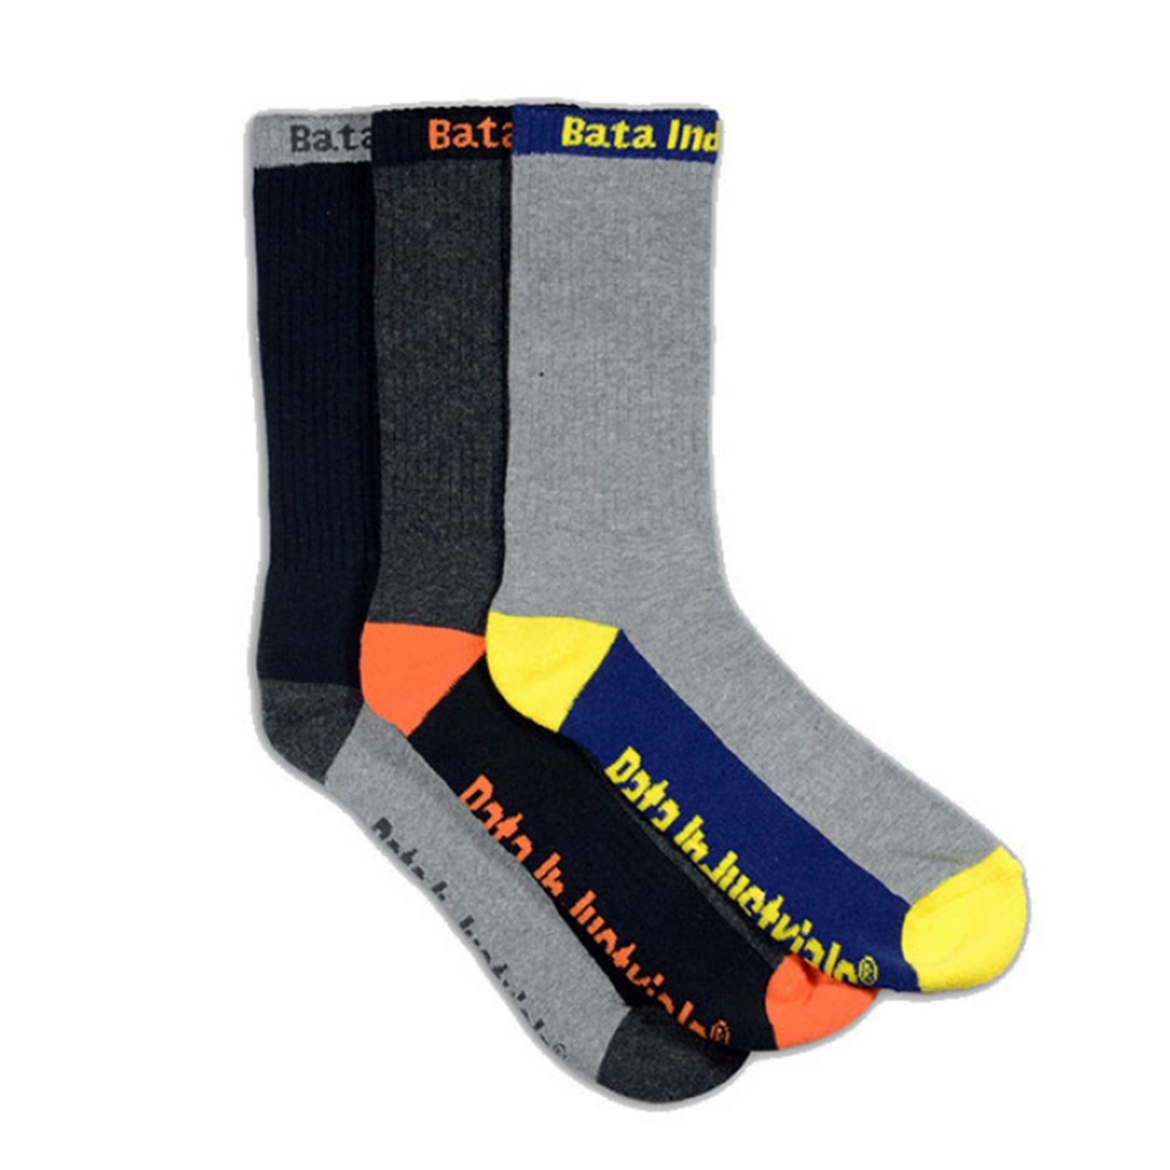 Picture of Bata Industrials, Work Socks, 3 Pack